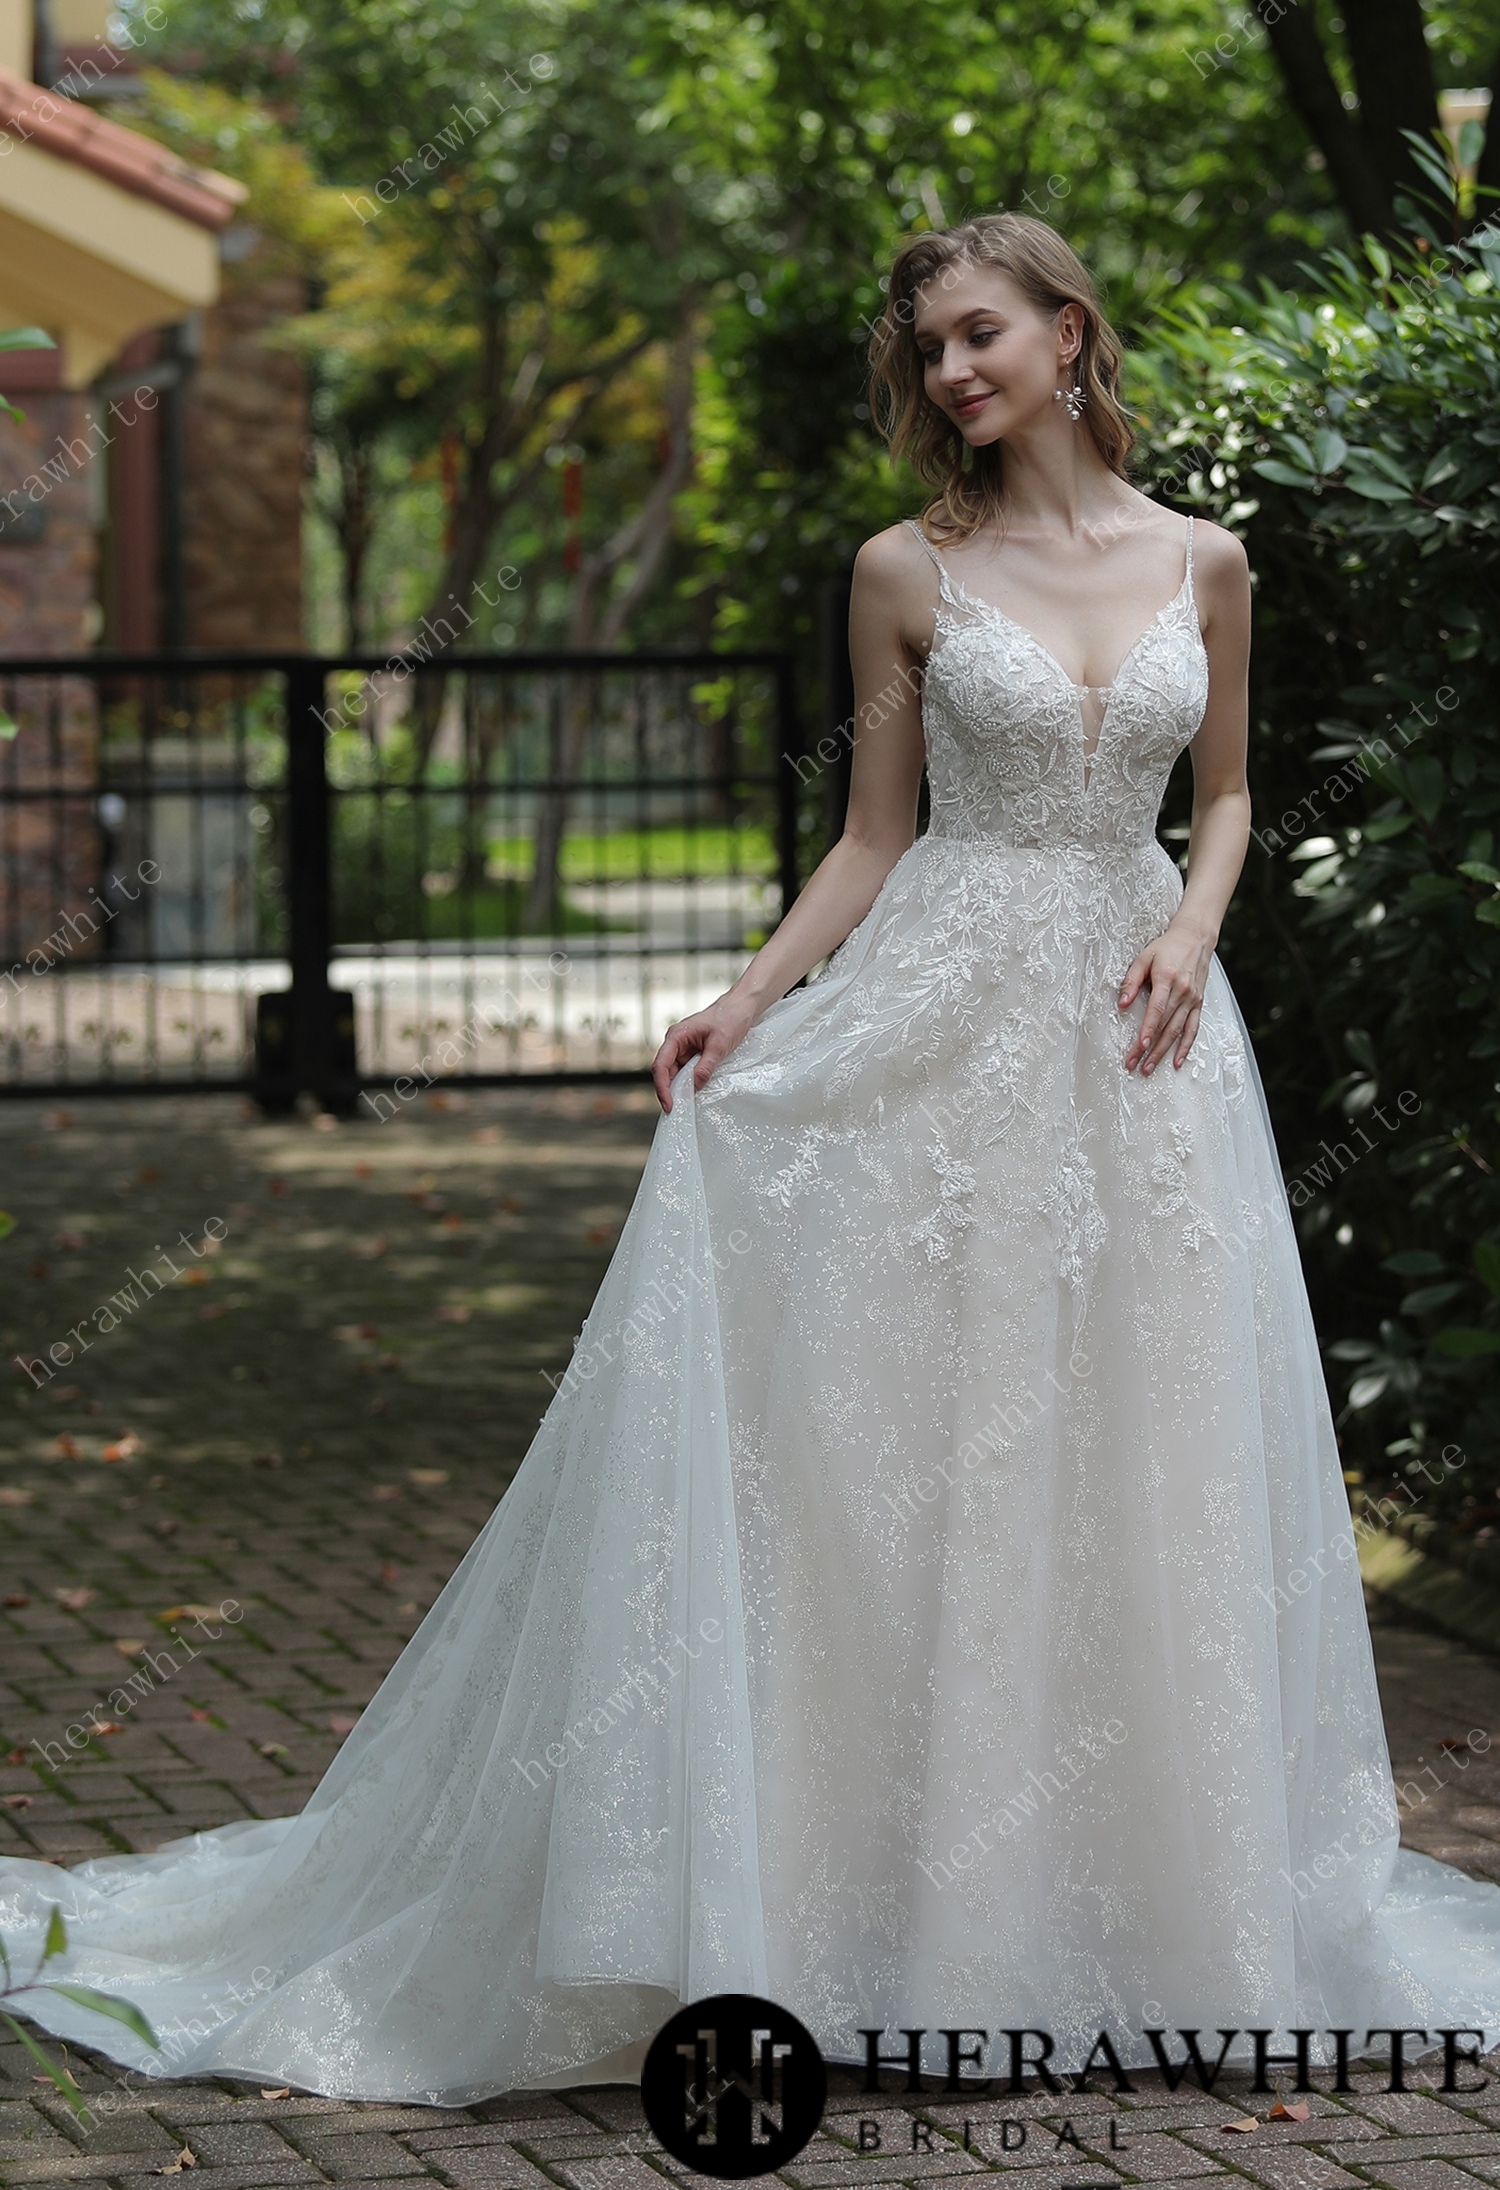 Sparkly A-Line Wedding Dress With Beaded Spaghetti Straps